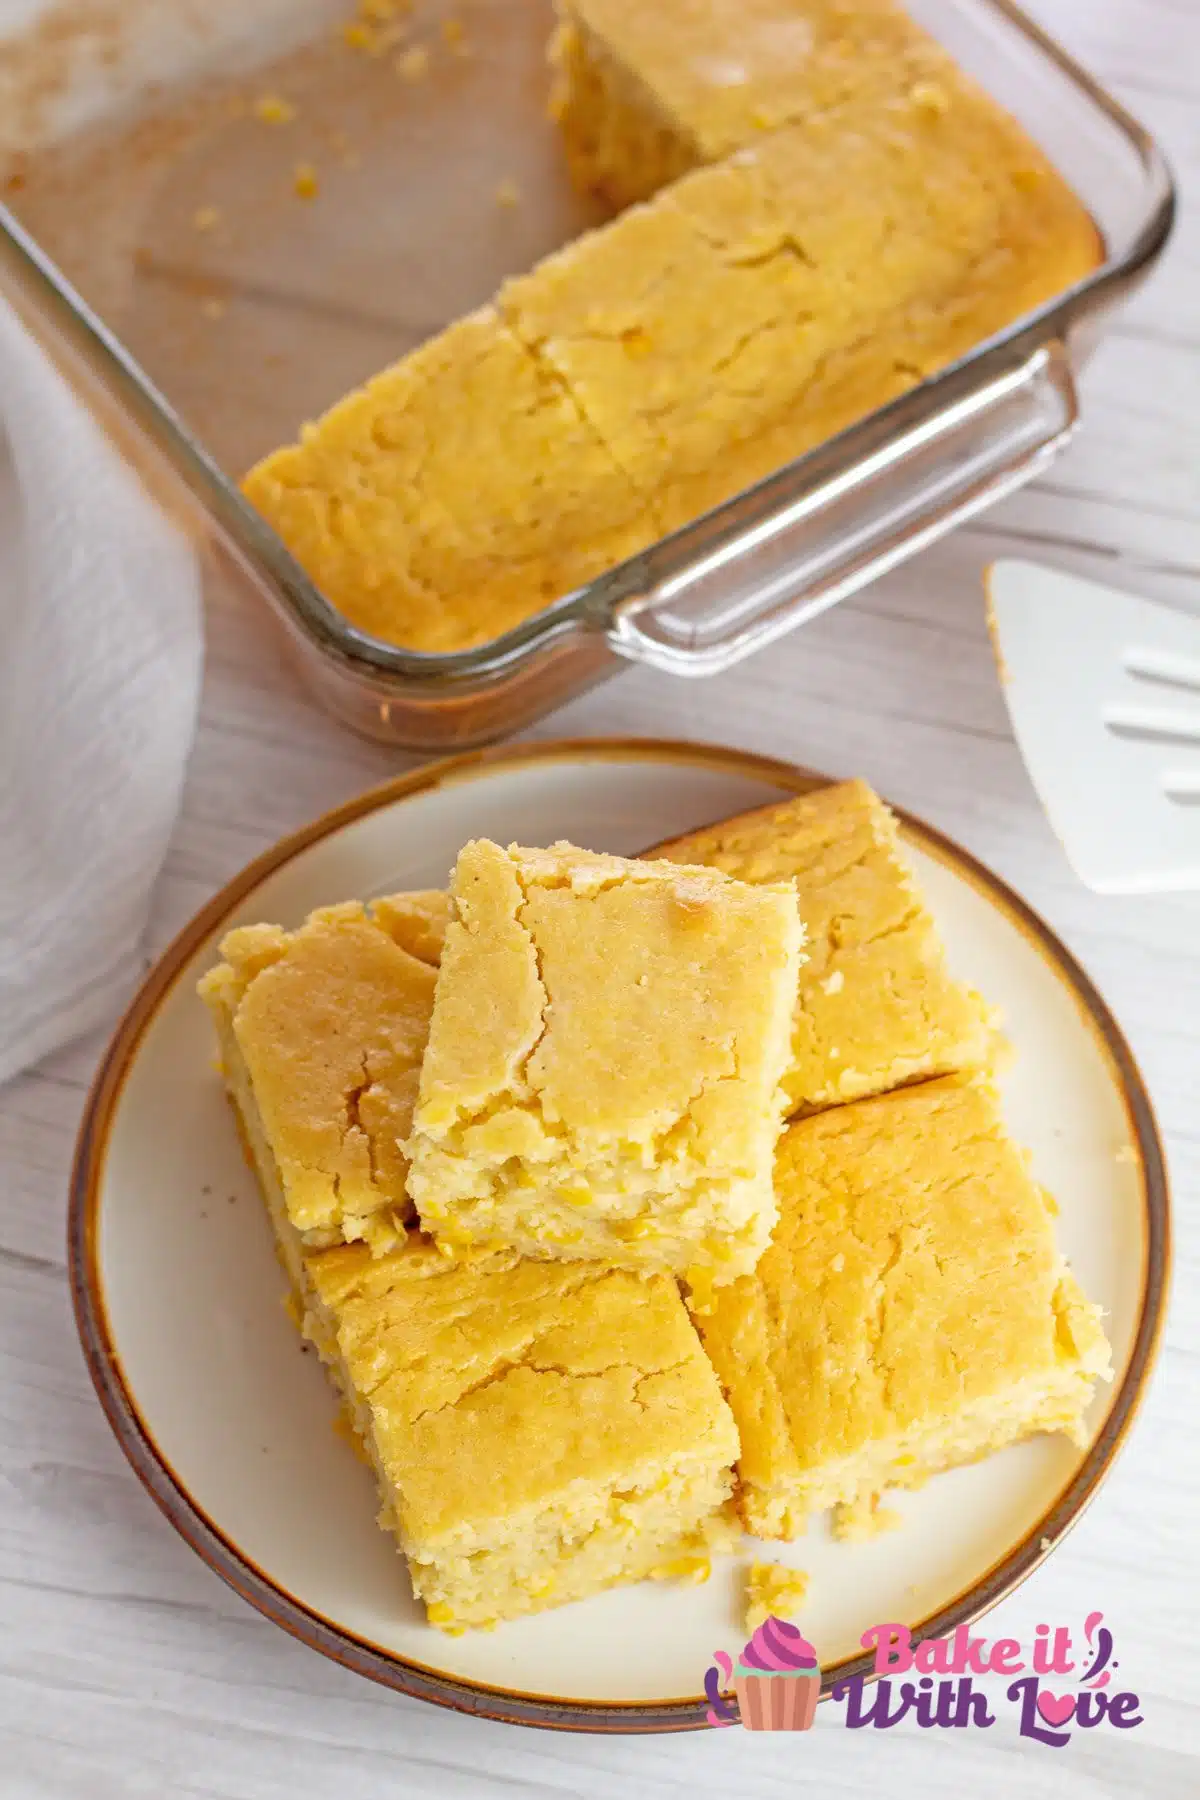 Best creamed corn cornbread overhead image of the stacked slices on a plate with baking dish next to them.